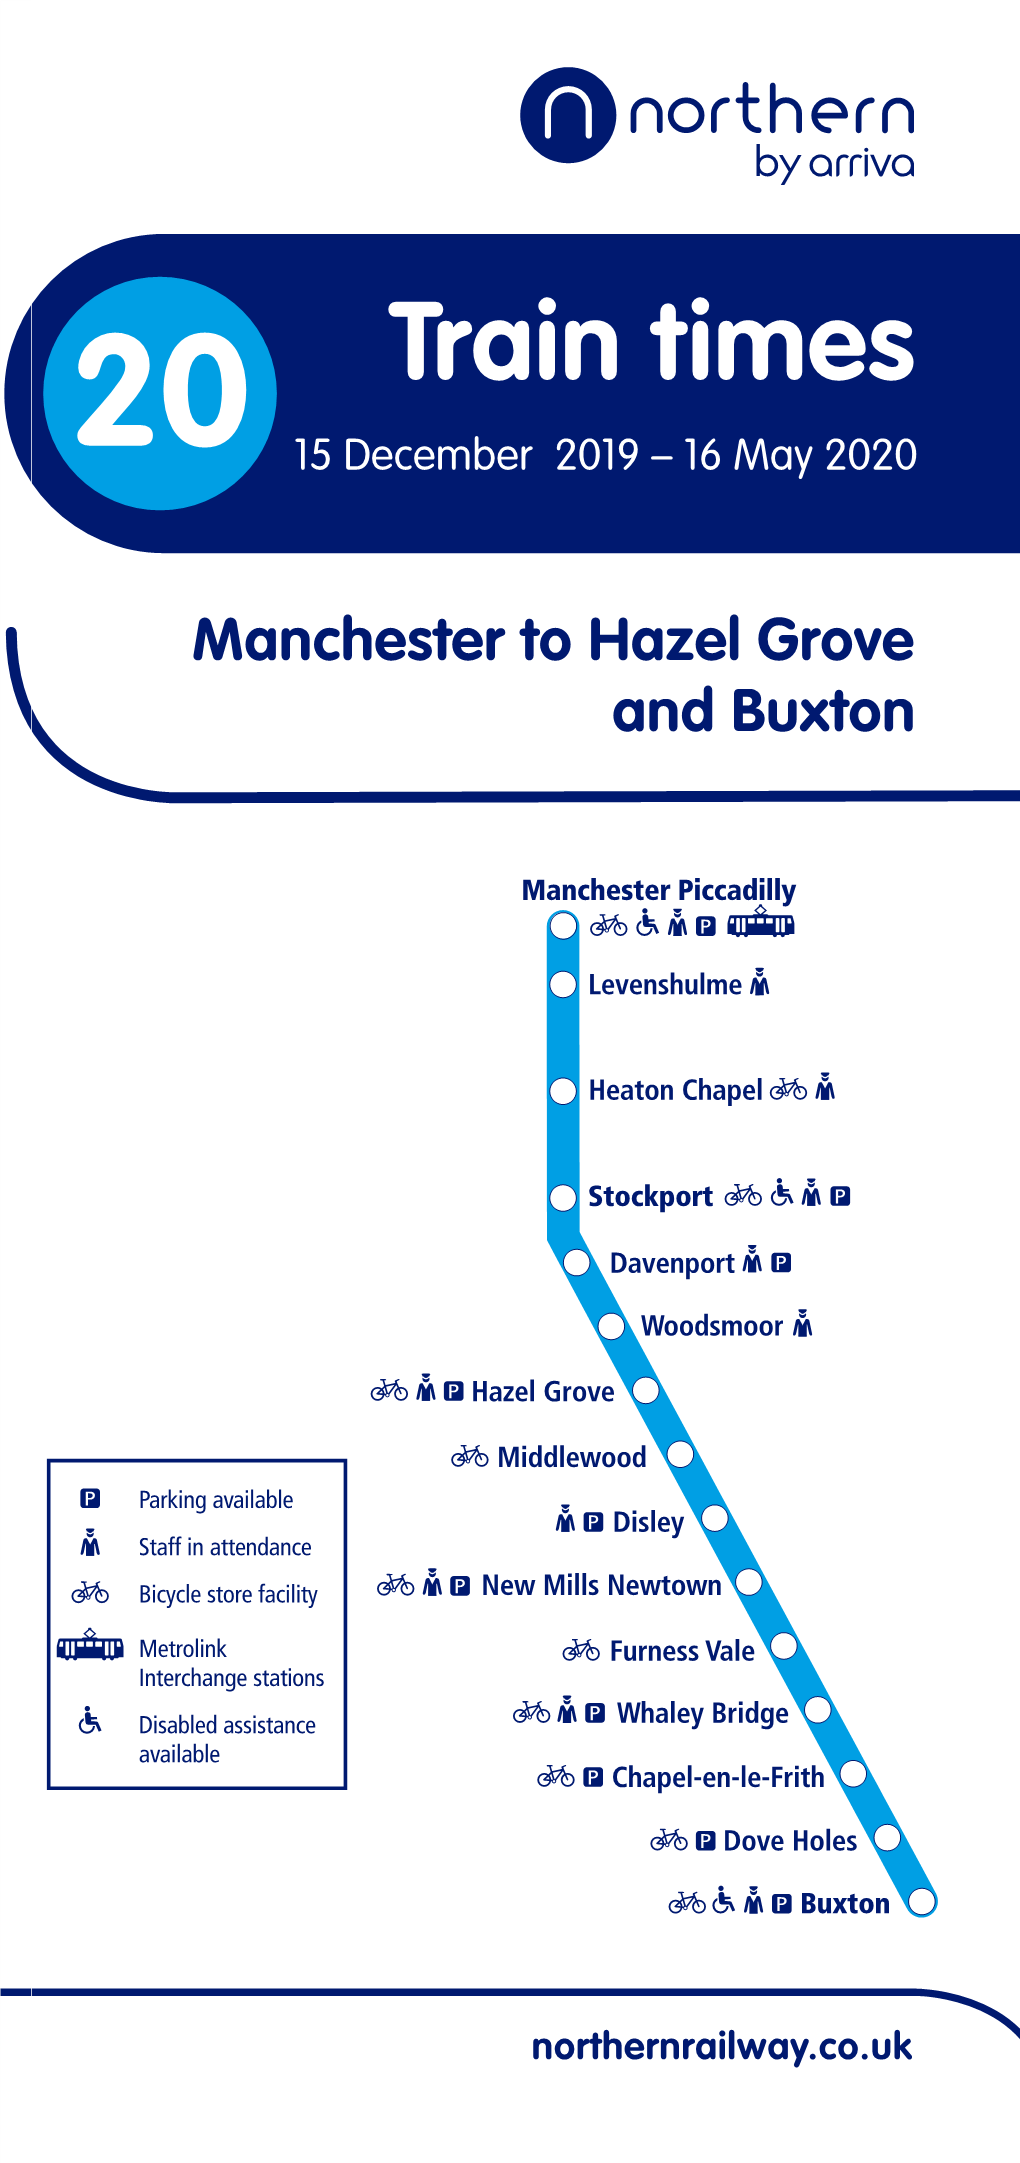 20 Train Times Manchester to Hazel Grove and Buxton